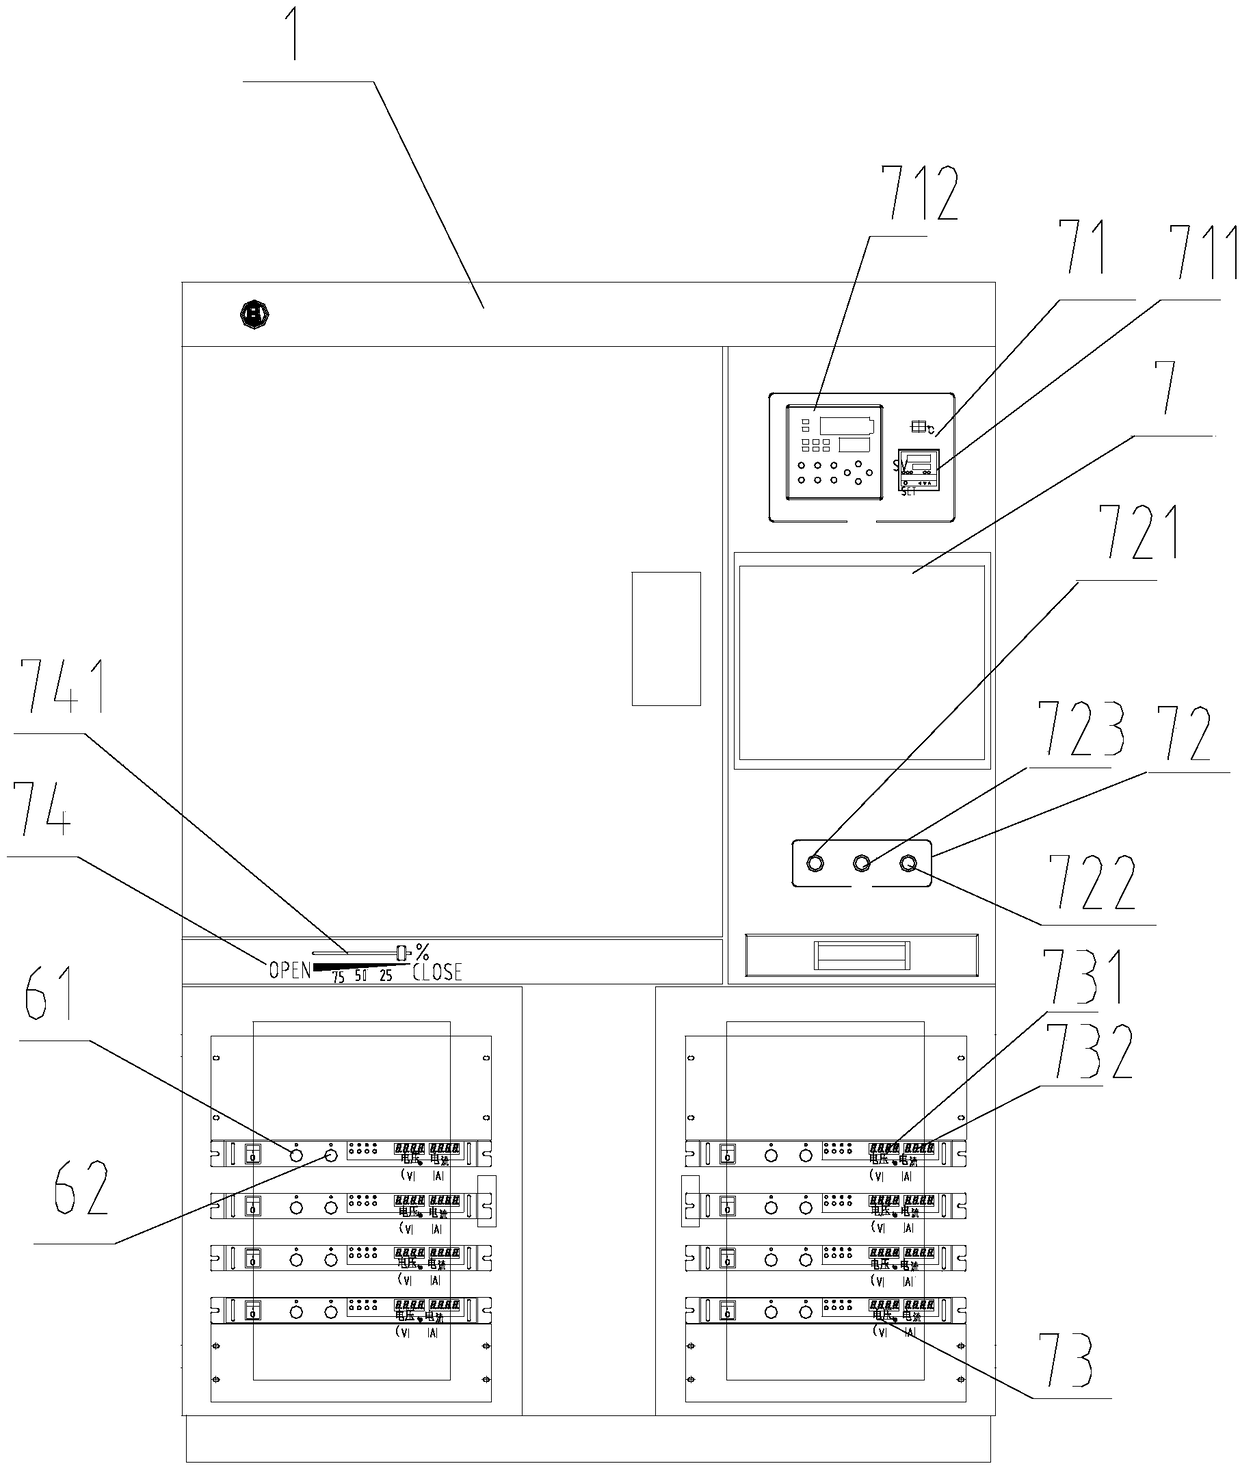 Integrated circuit aging test device